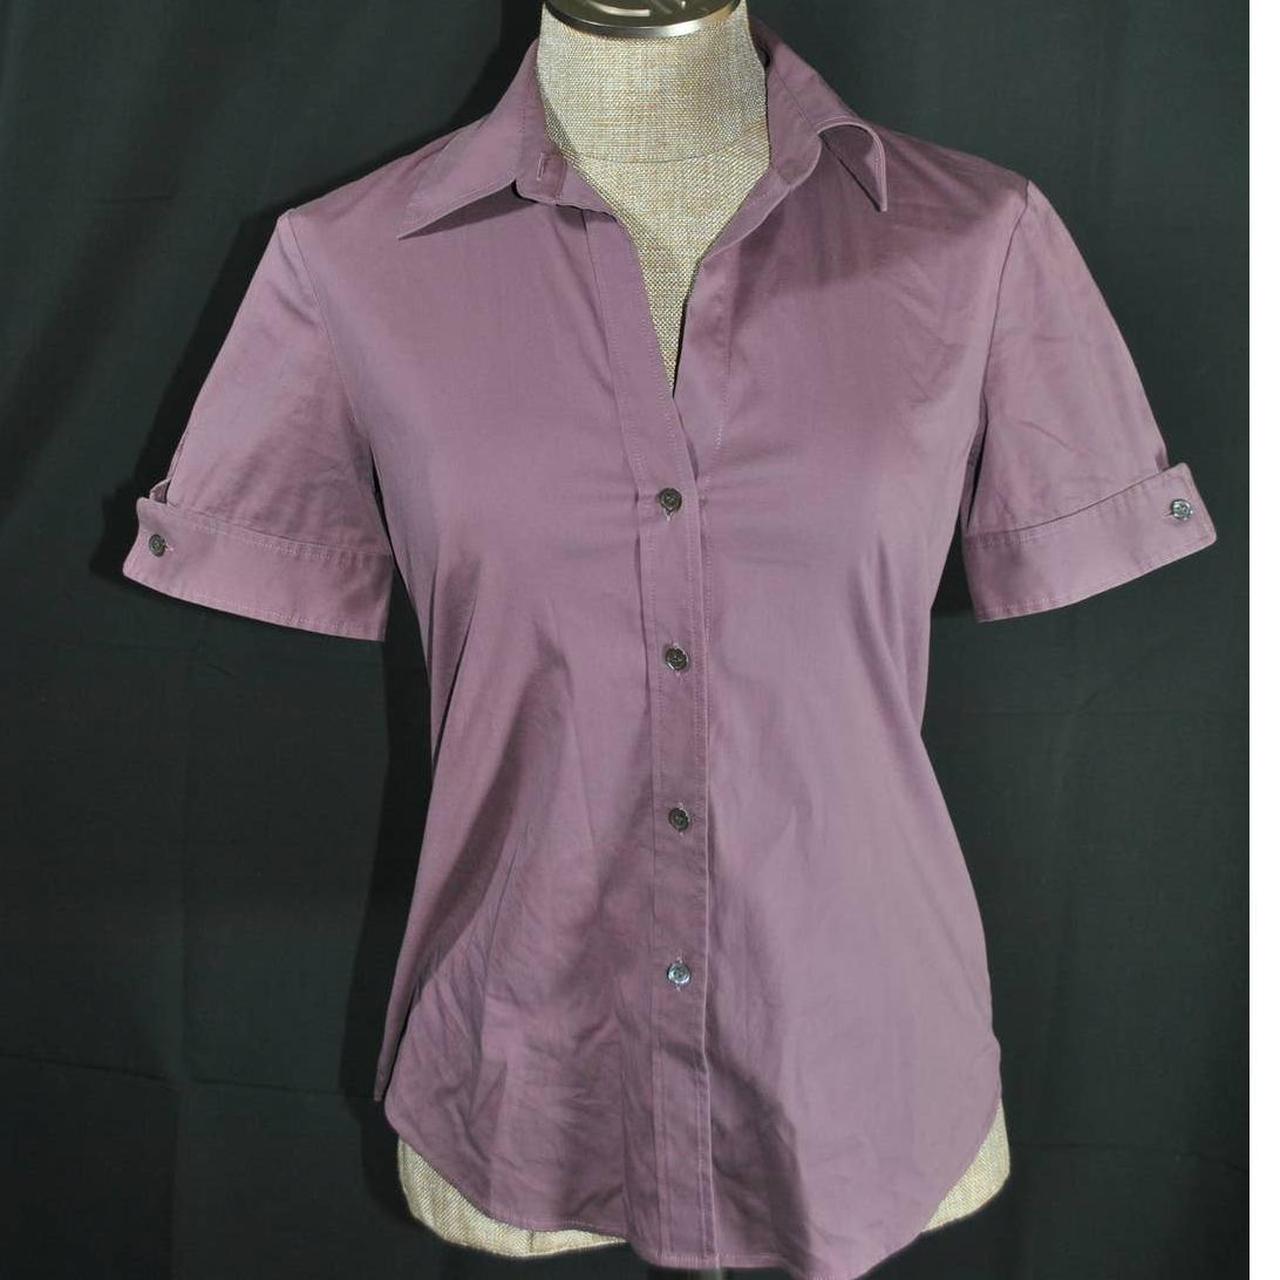 Product Image 3 - Theory lavender Button Up 

Measurements
Underarm